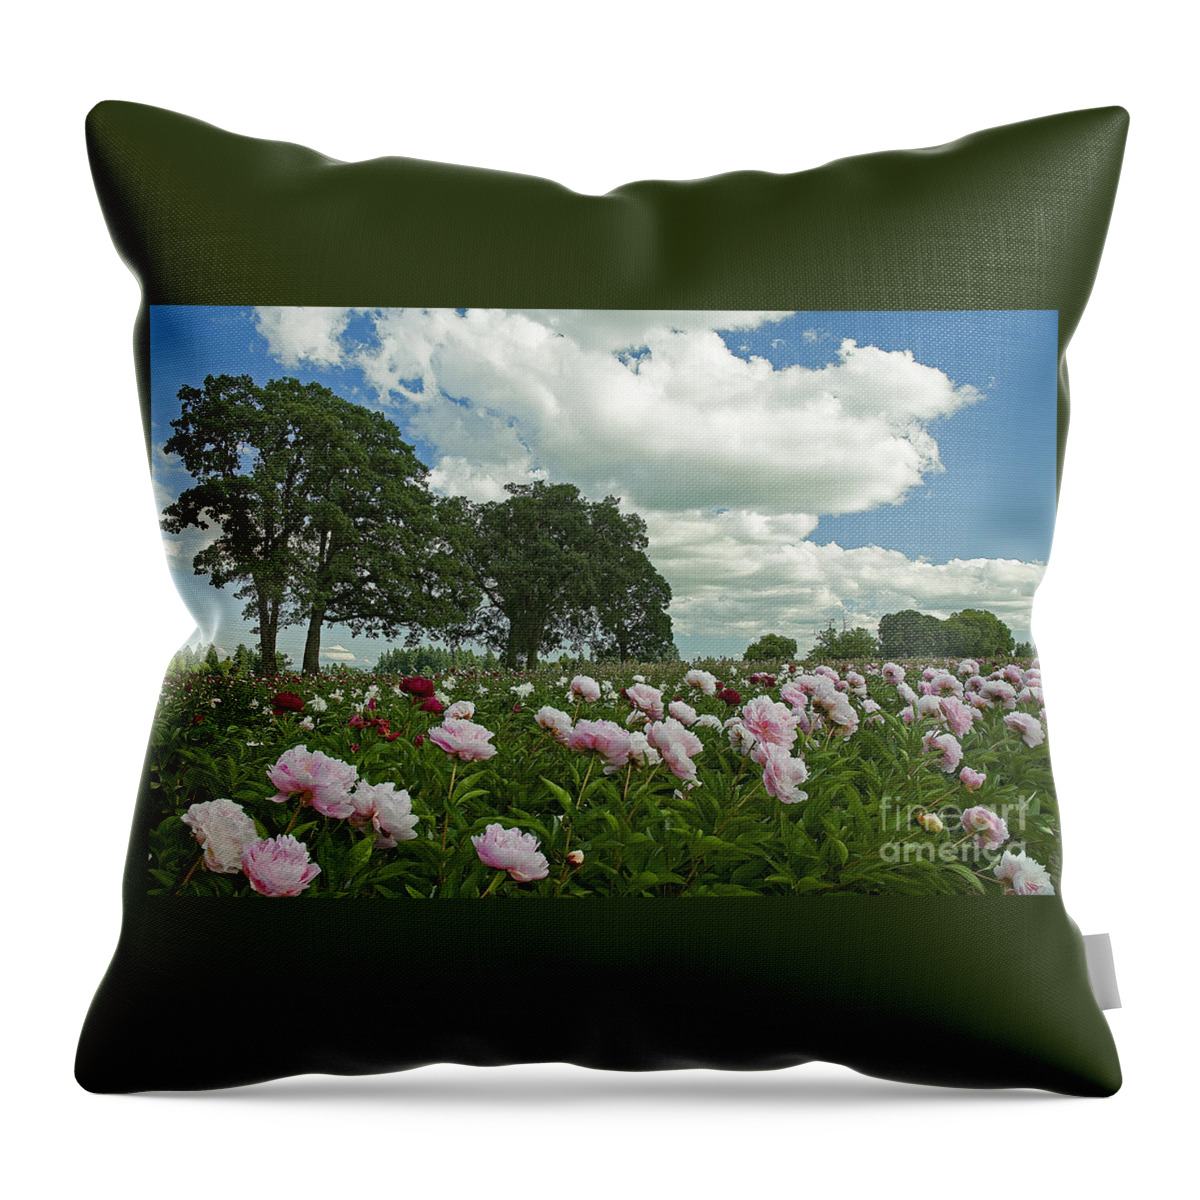 Pacific Throw Pillow featuring the photograph Adleman's Peony Fields by Nick Boren